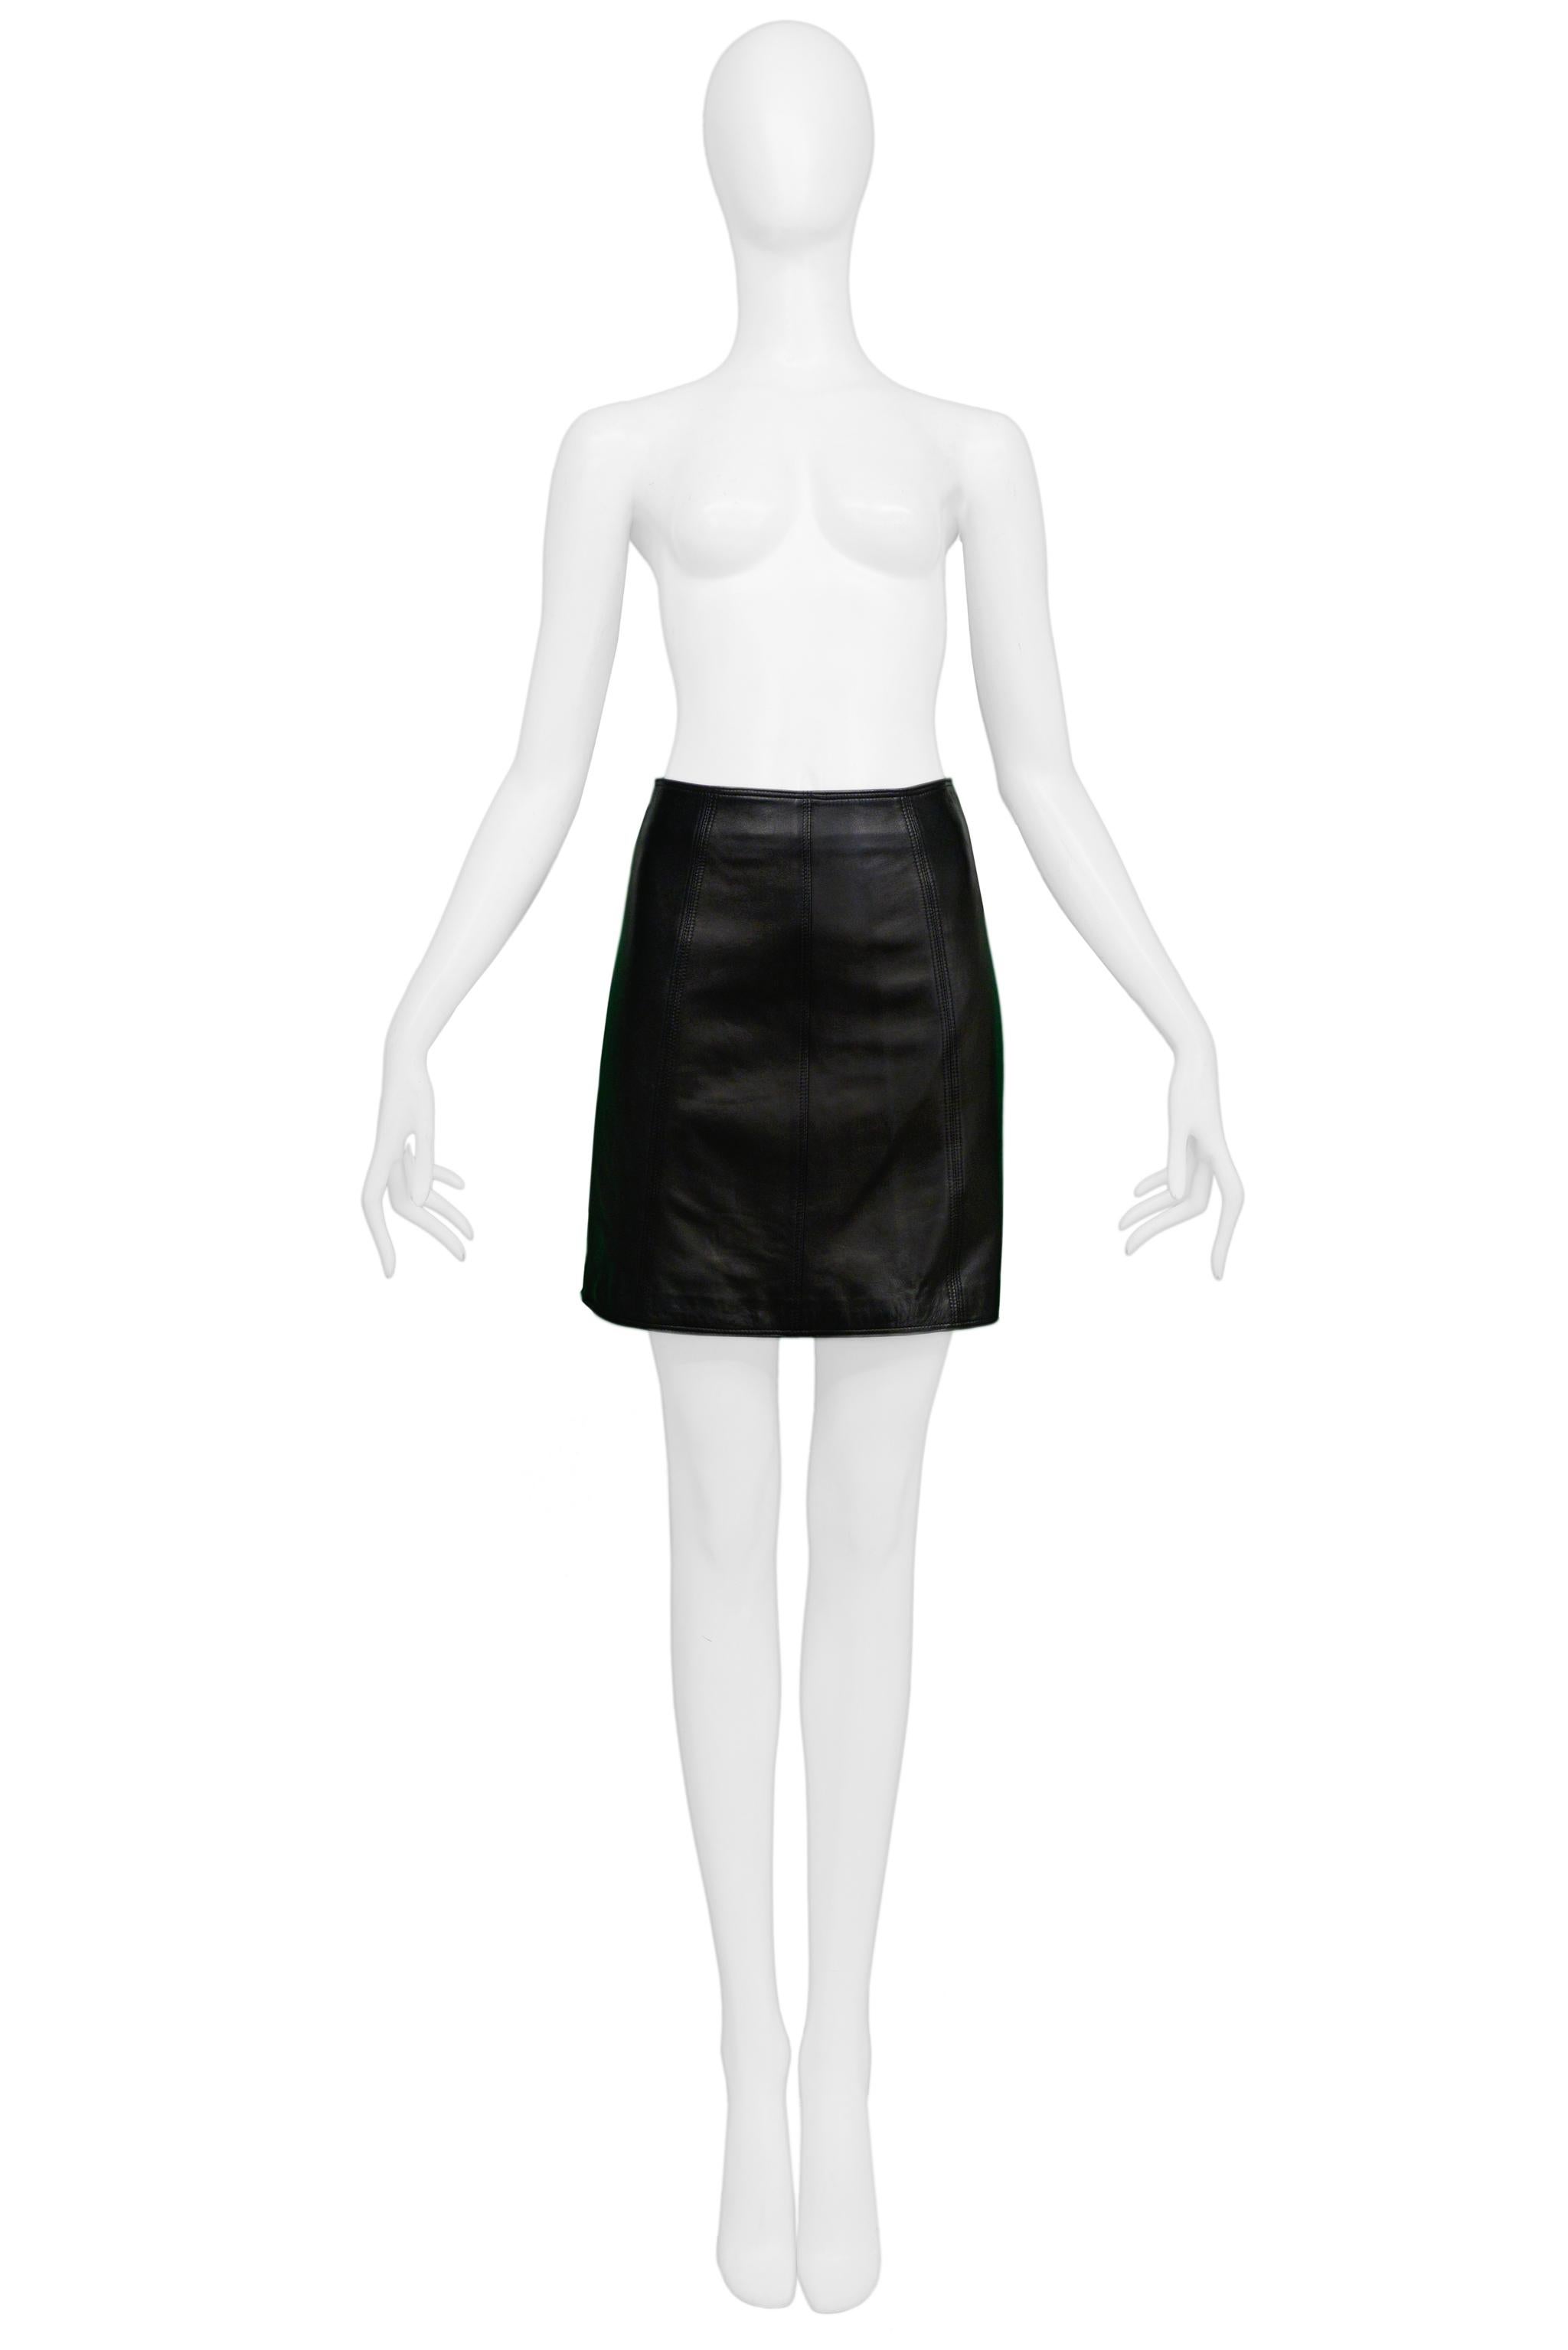 Resurrection Vintage is excited to offer a vintage Versace black leather mini skirt featuring a slightly high waist, decorative black stitching, and a center back zipper. 

Versace
Size Small
Waist: 24/25